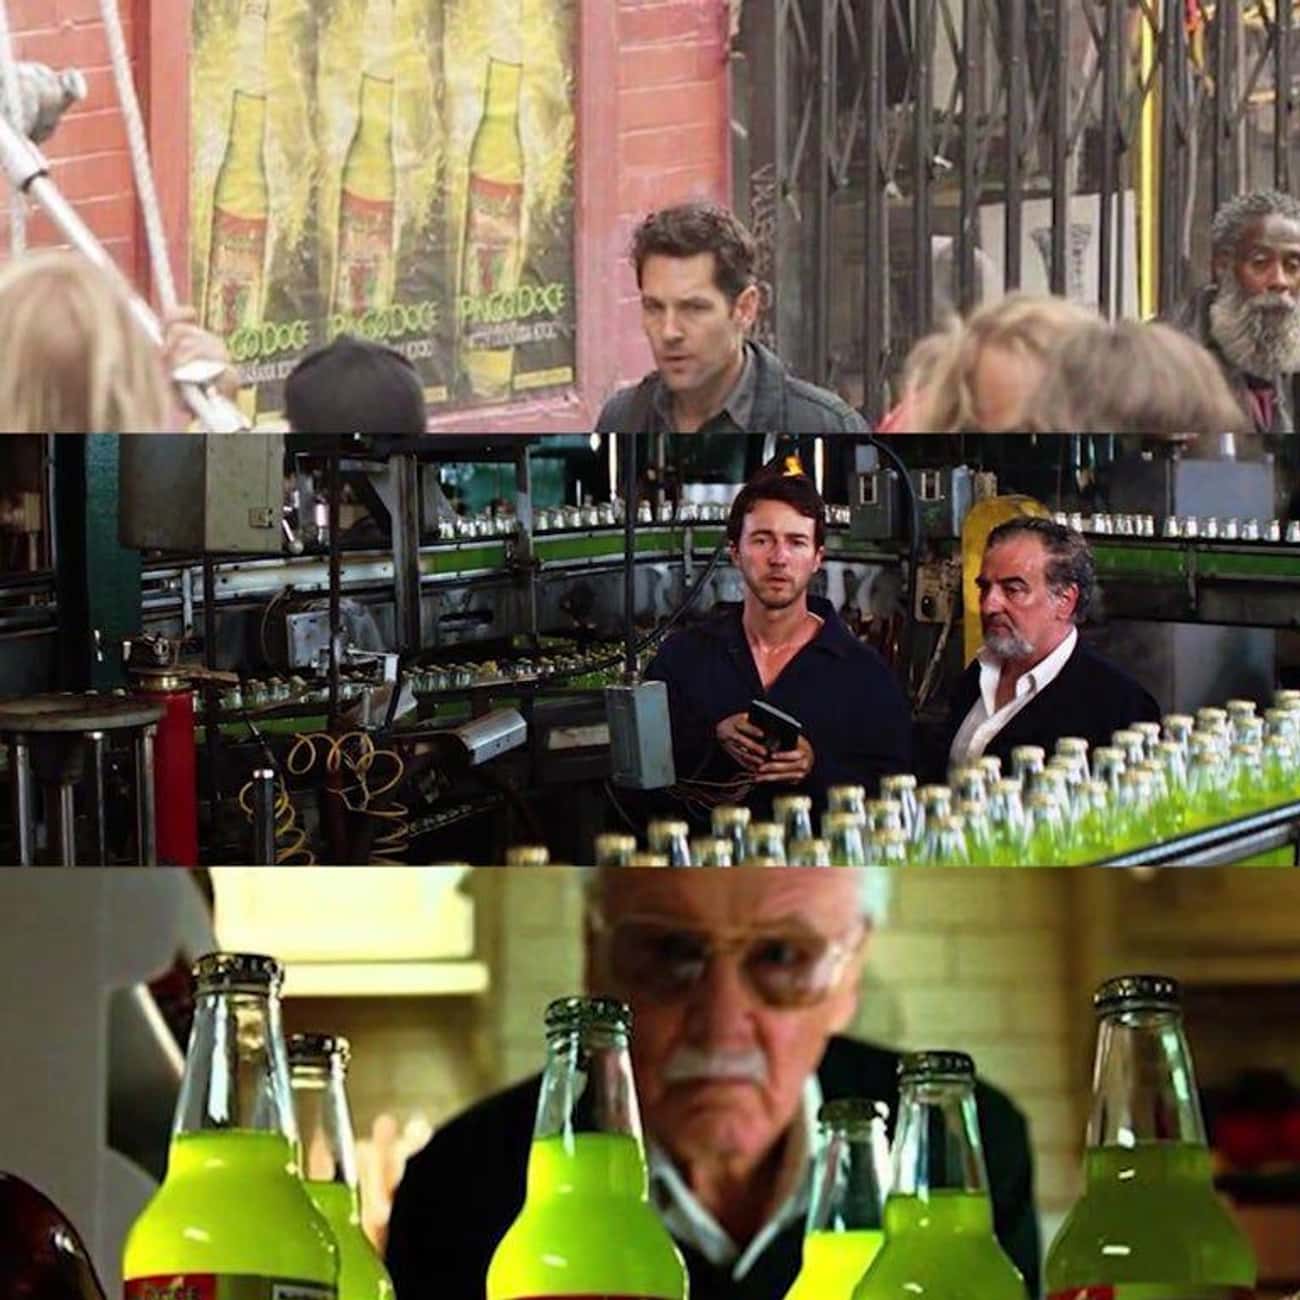 A picture of the soda company that Bruce Banner worked at and Stan Lee drank appears on a poster next to Scott Lang.